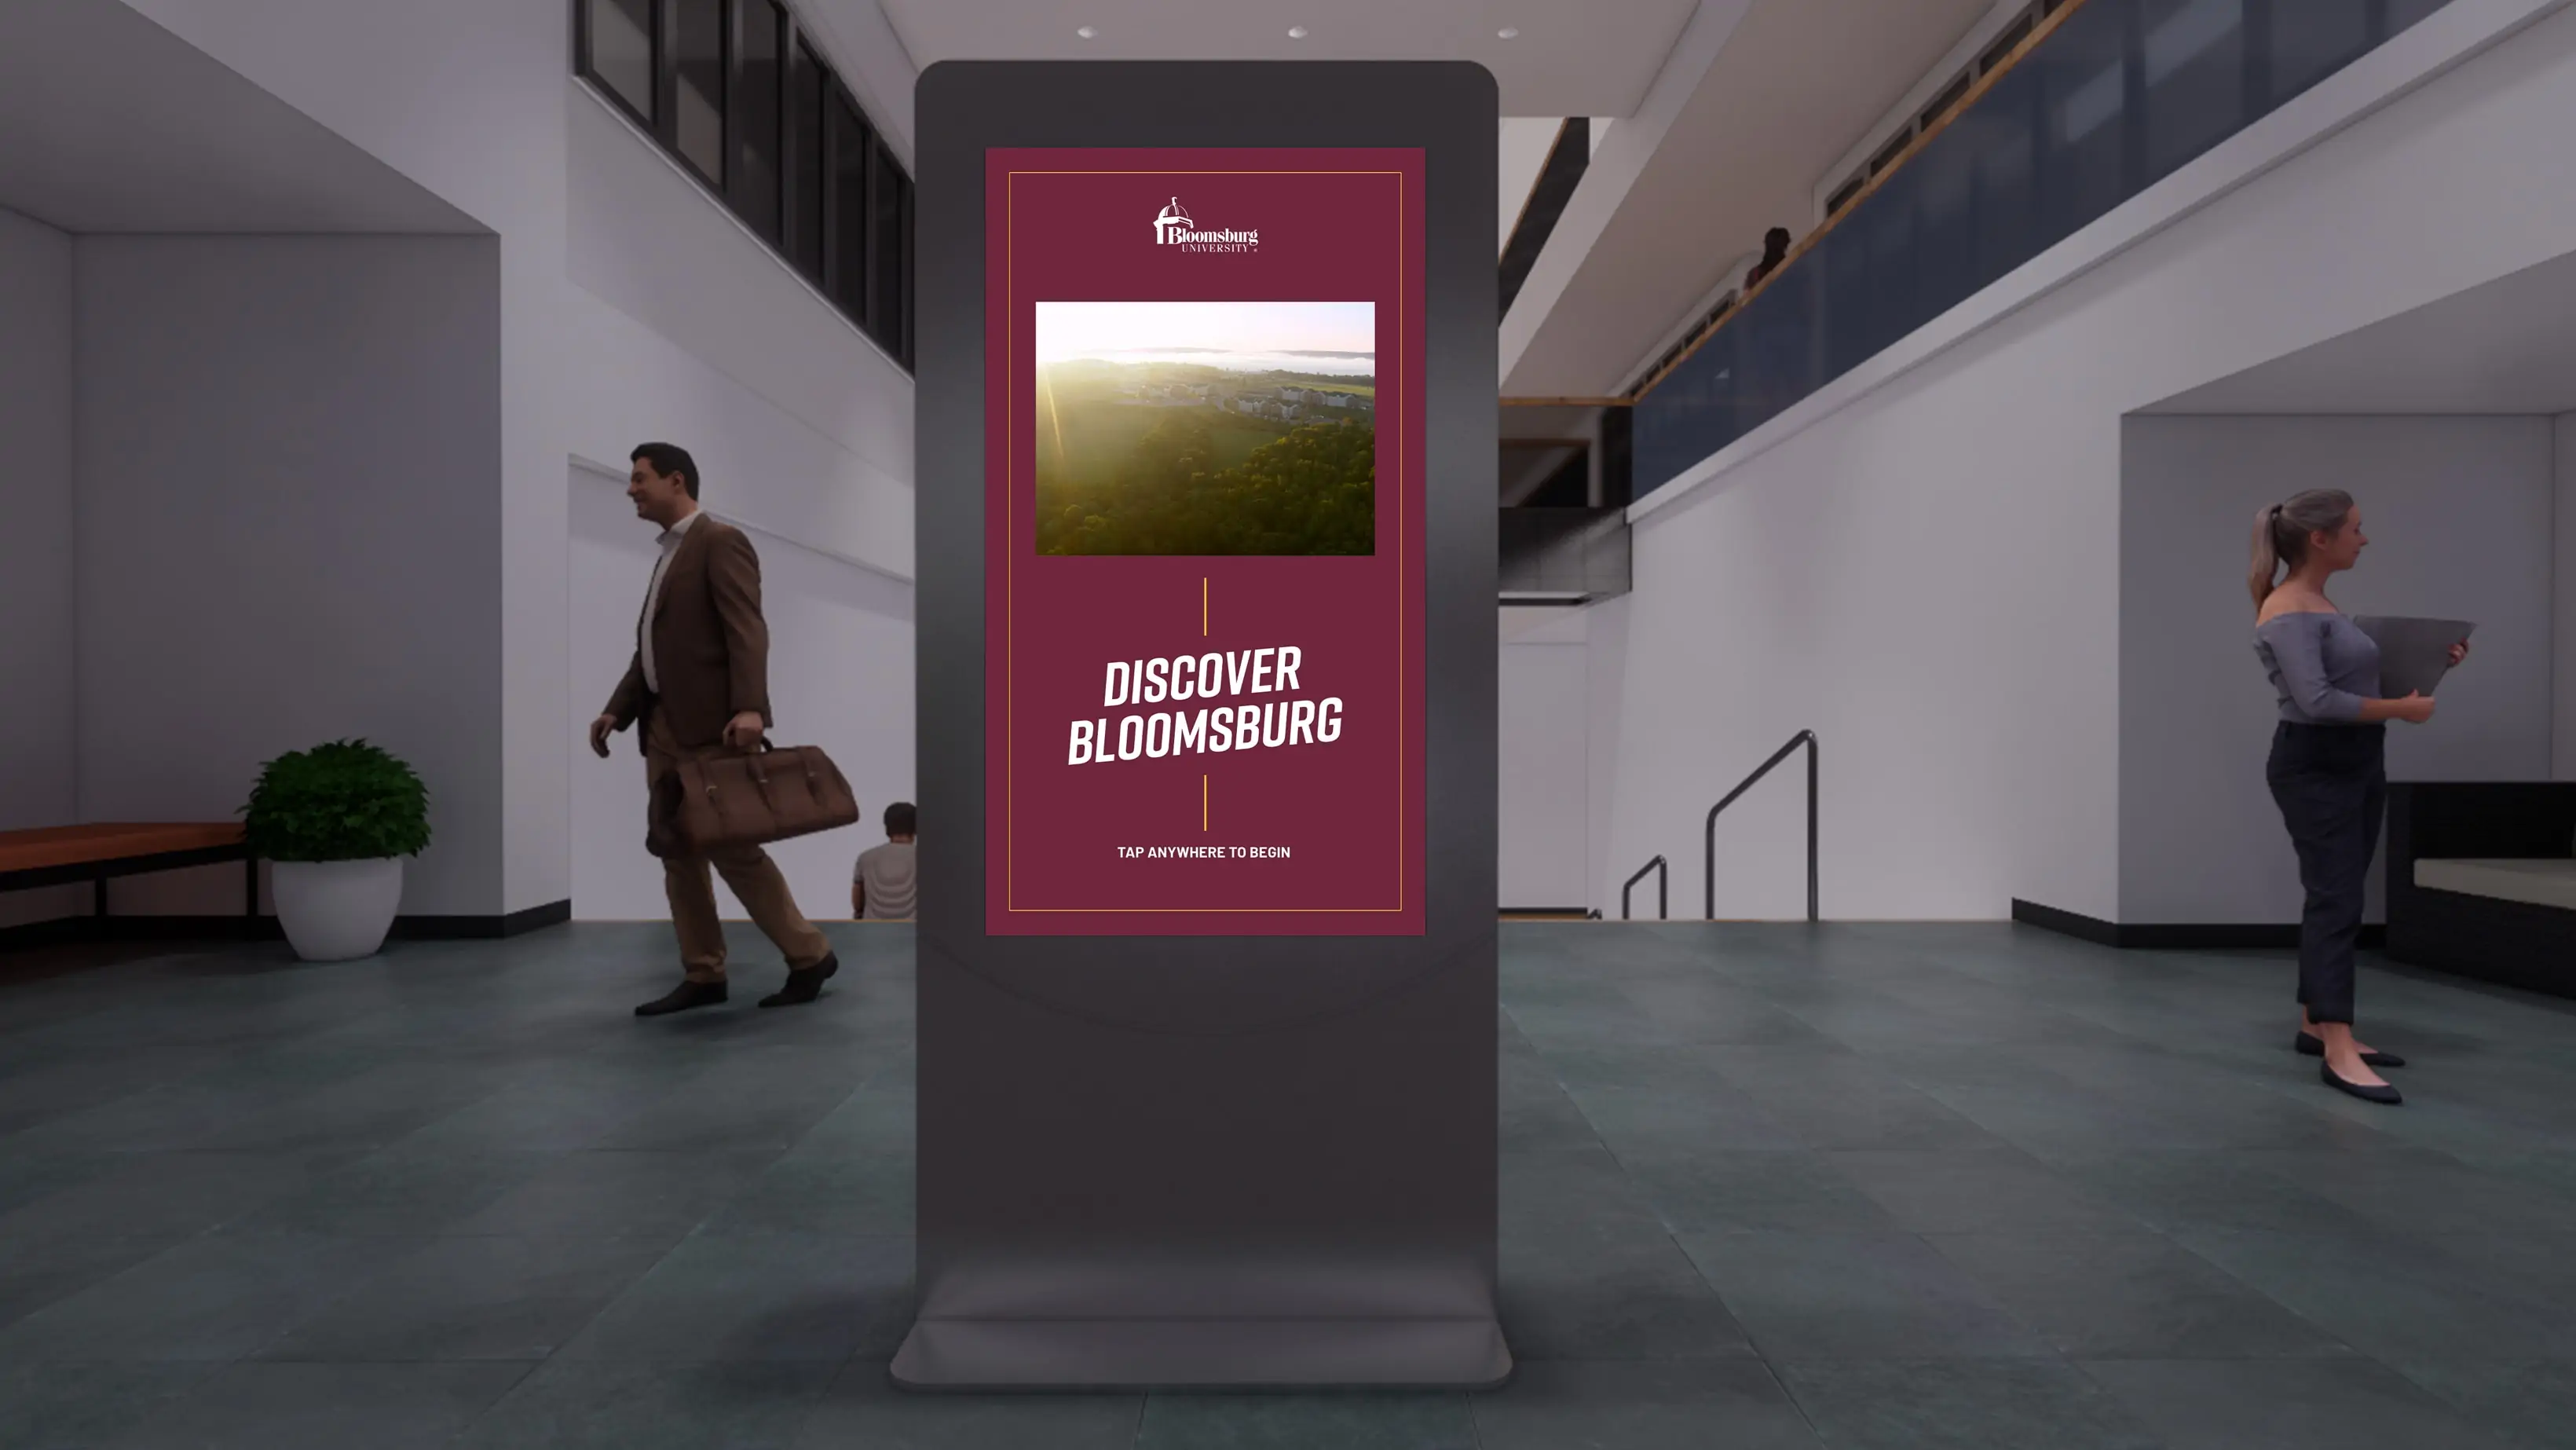 Image of a tall electronic display in the middle of a building by a stairwell with a "Discover Bloomsburg" Image on the screen